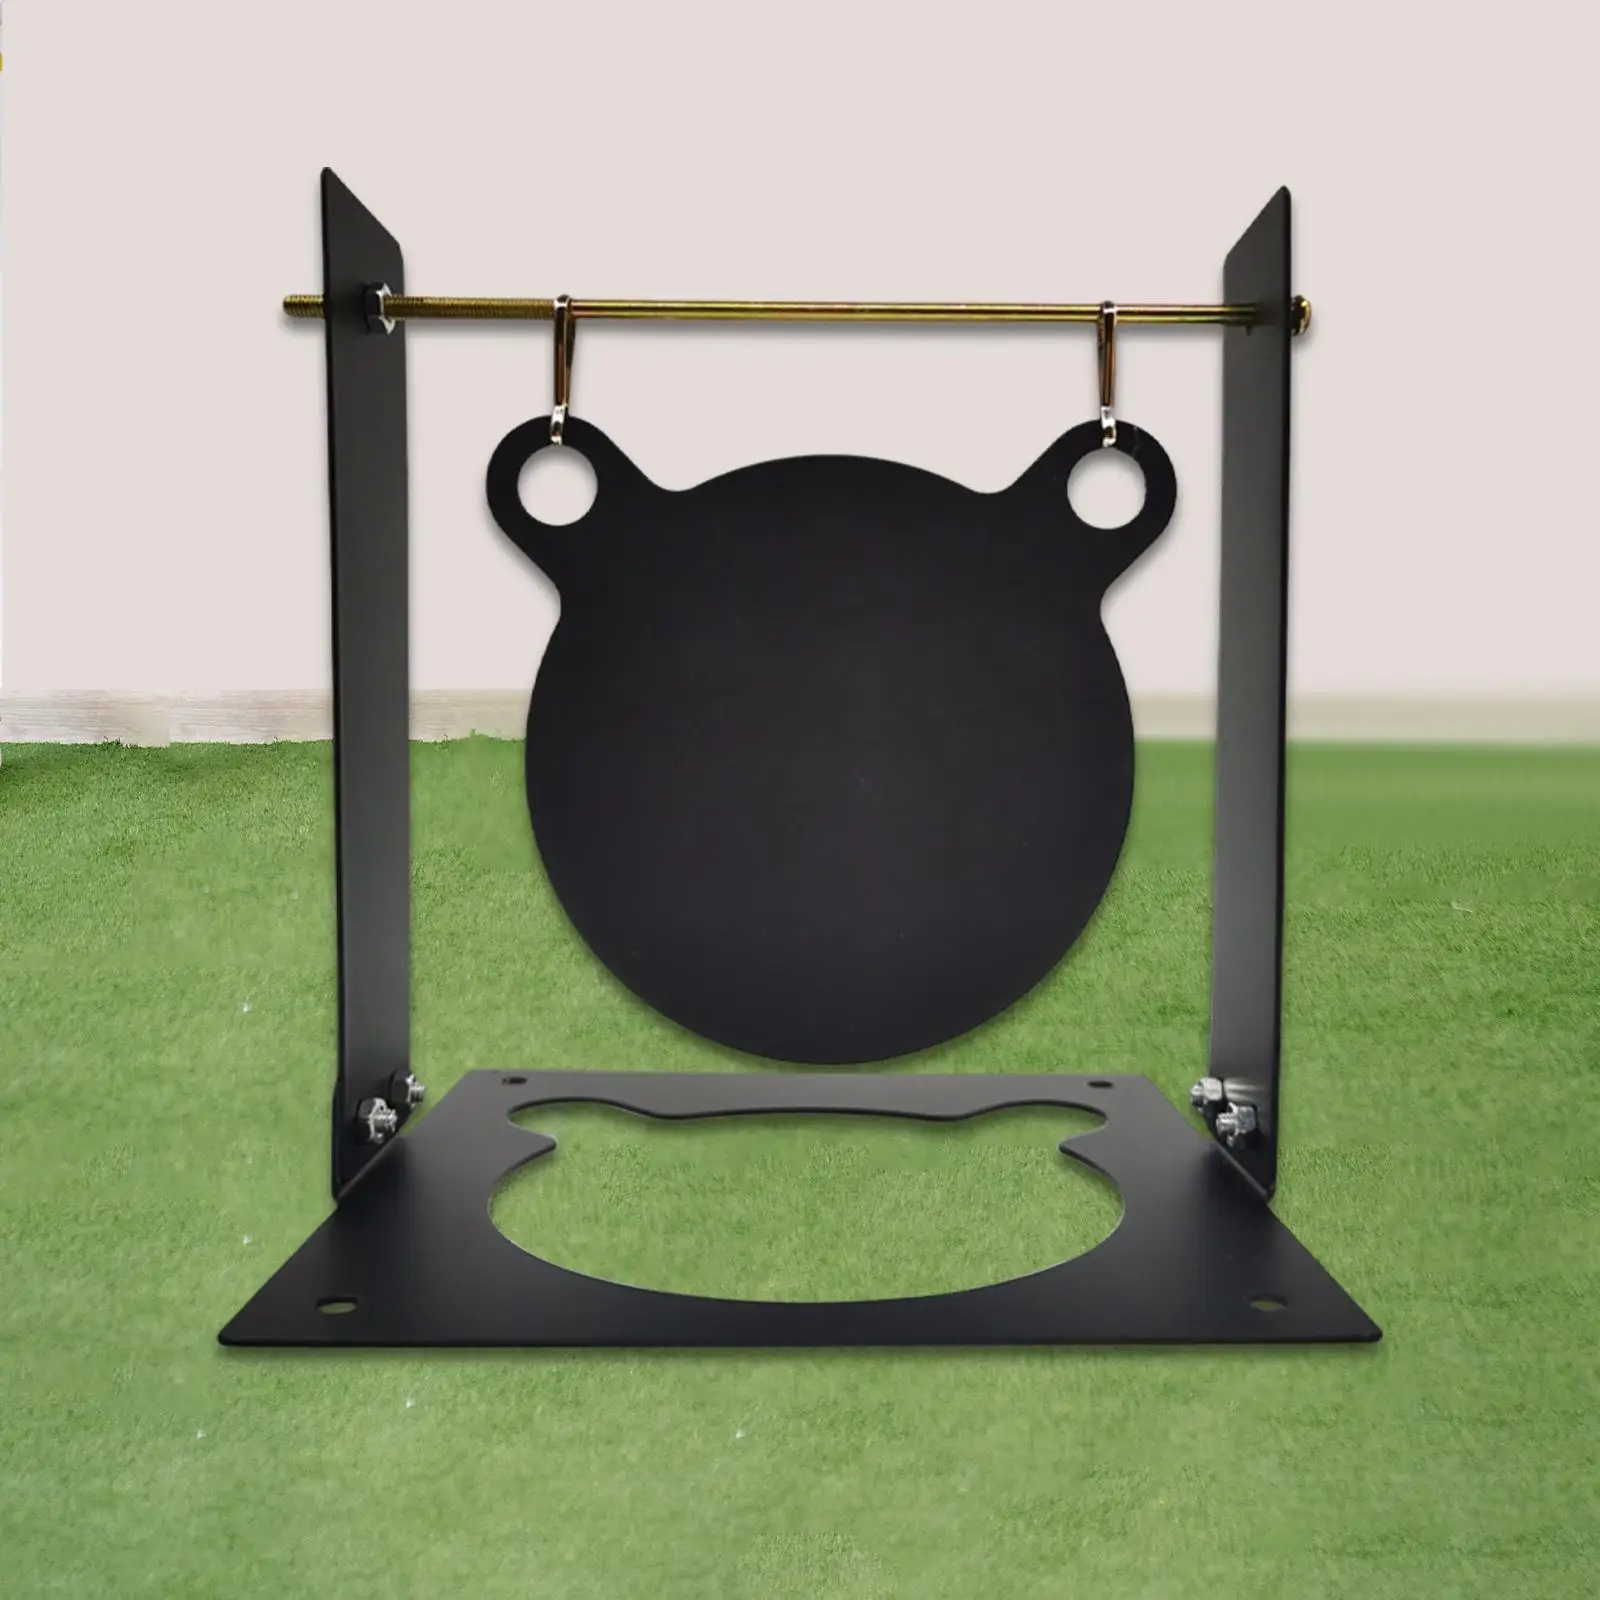 Trainer Target Bear Shaped Hanging Target Outdoor Sports Toy Target for Kids